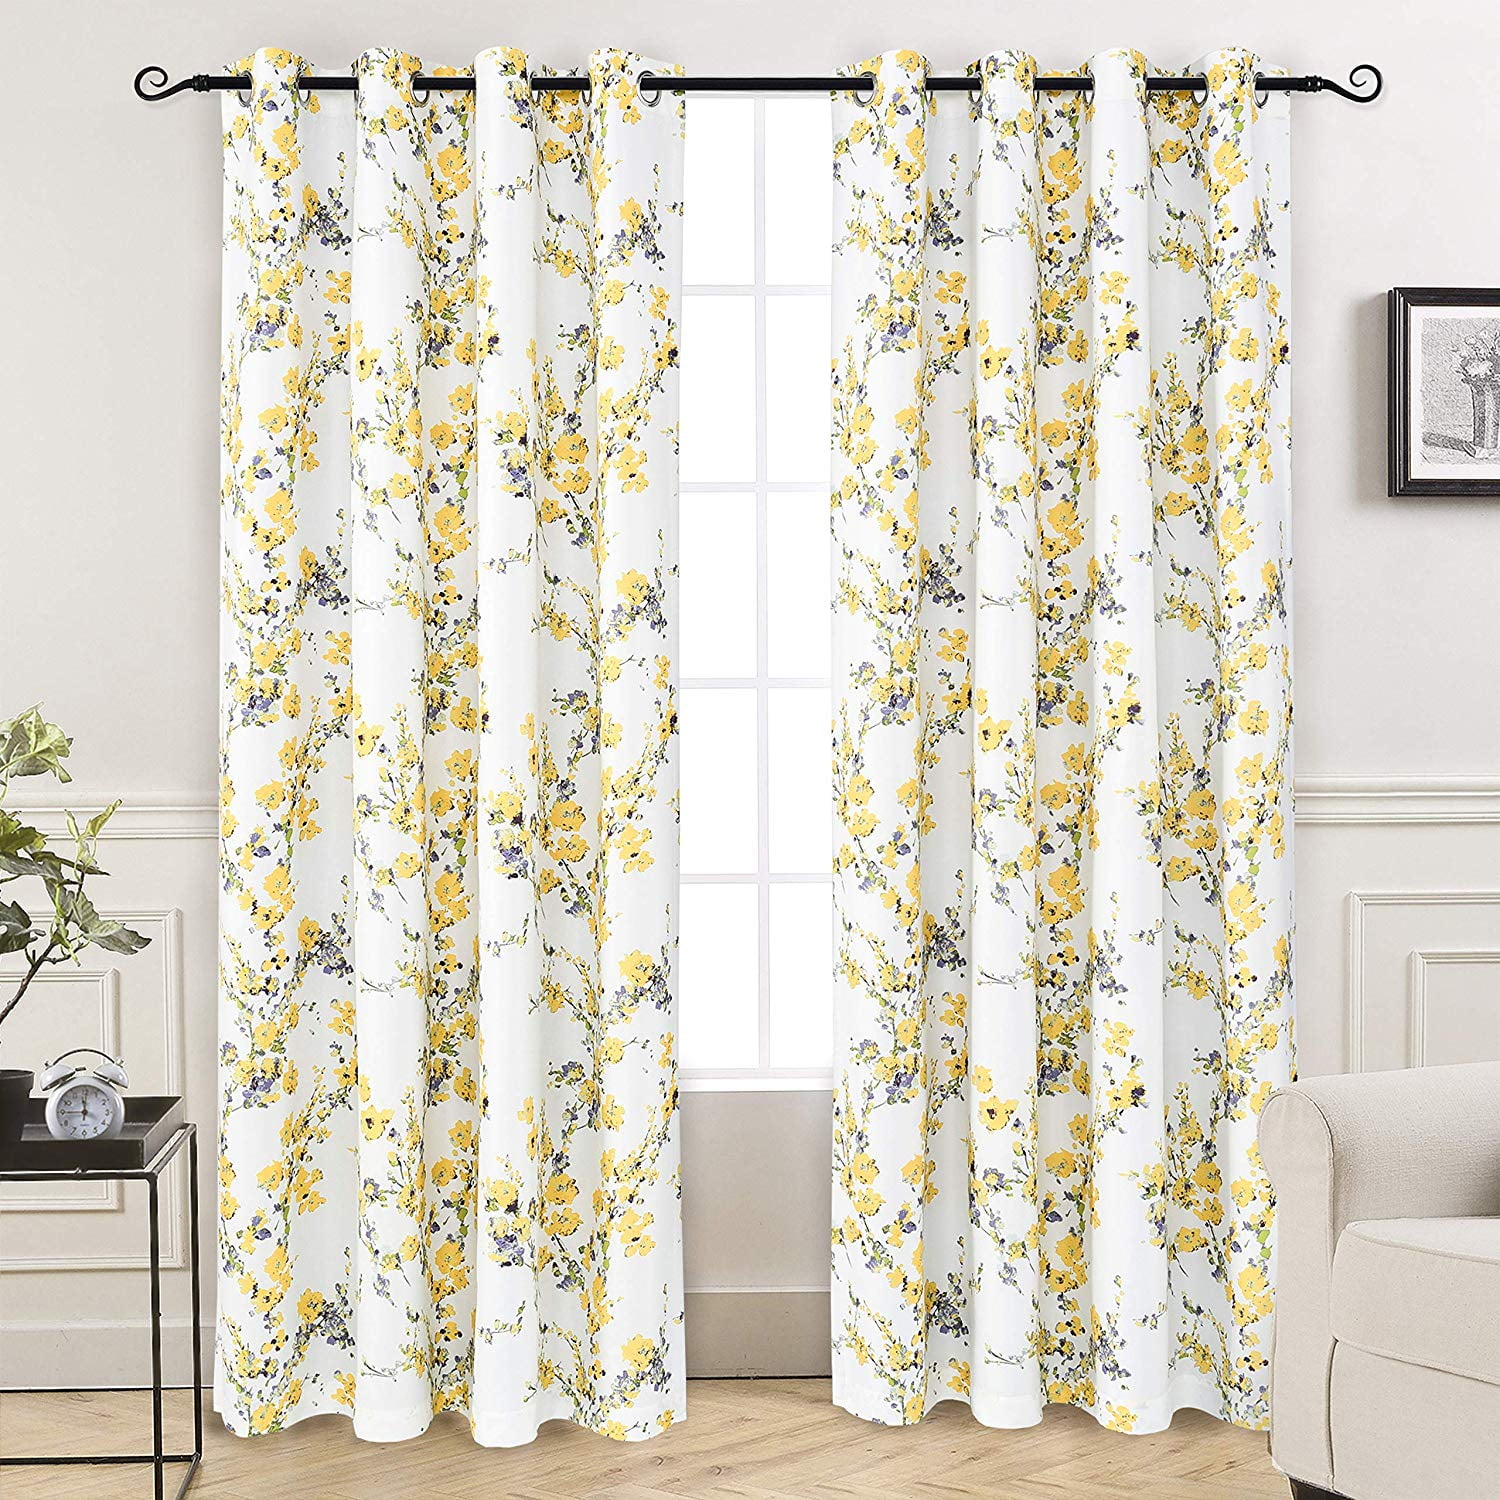 PEONY FLOWER GROMMET WINDOW CURTAIN LINED BLACKOUT PRINTED PANEL OR VALANCE 